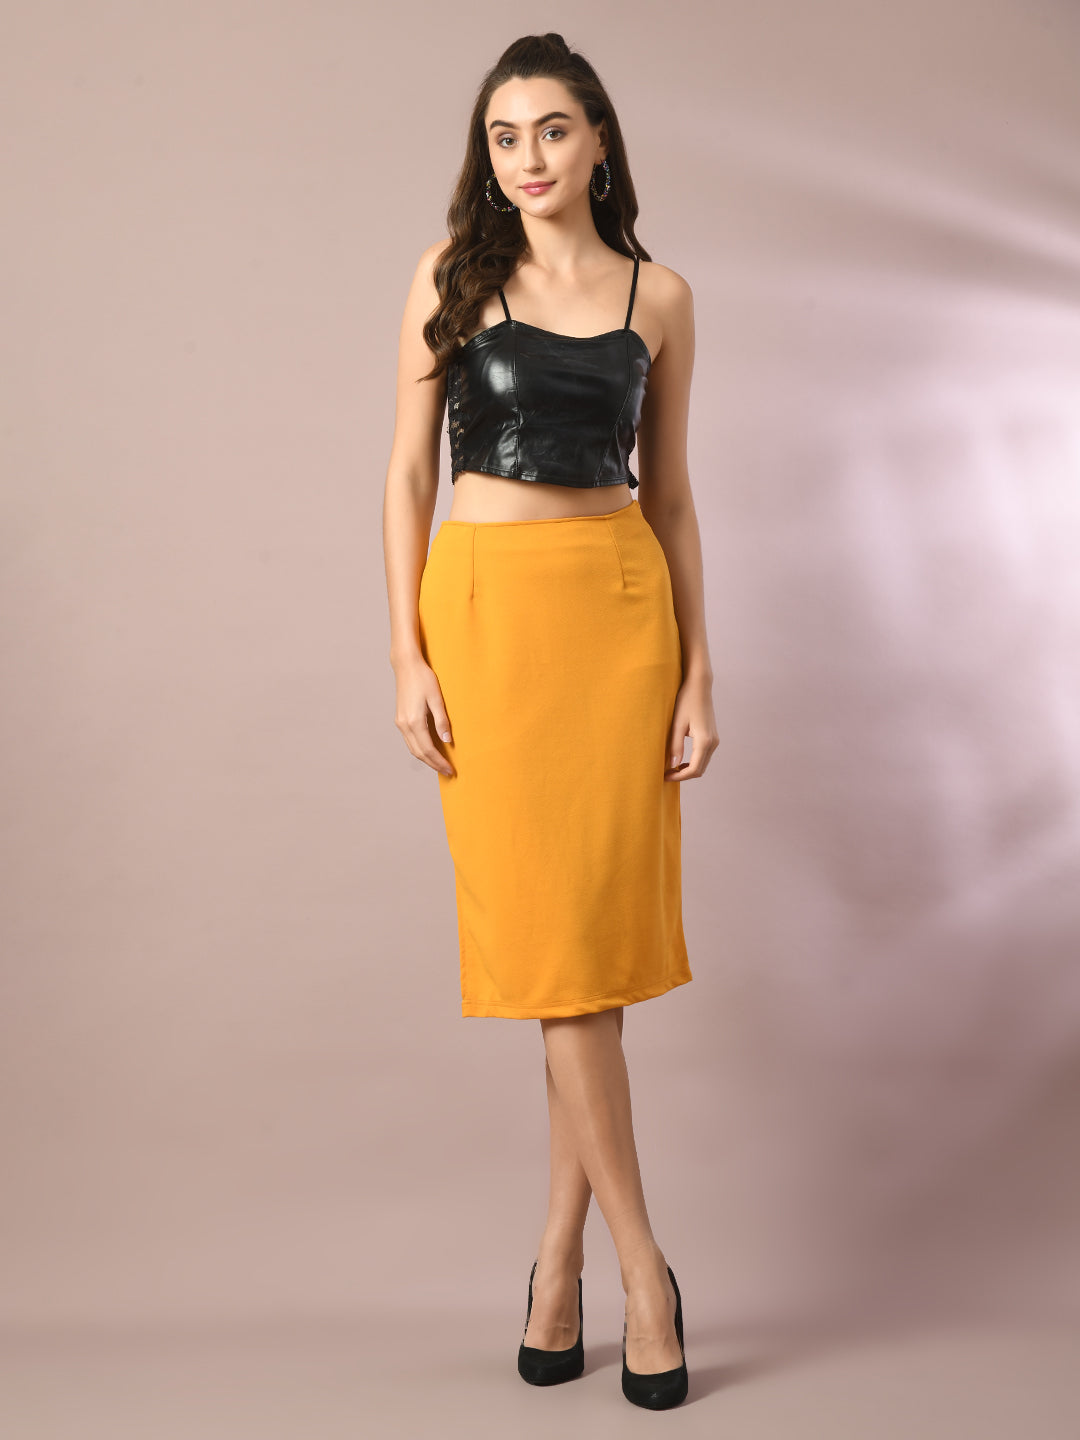 Women's  Yellow Solid Knee Length Party Embellished Skirts   - Myshka